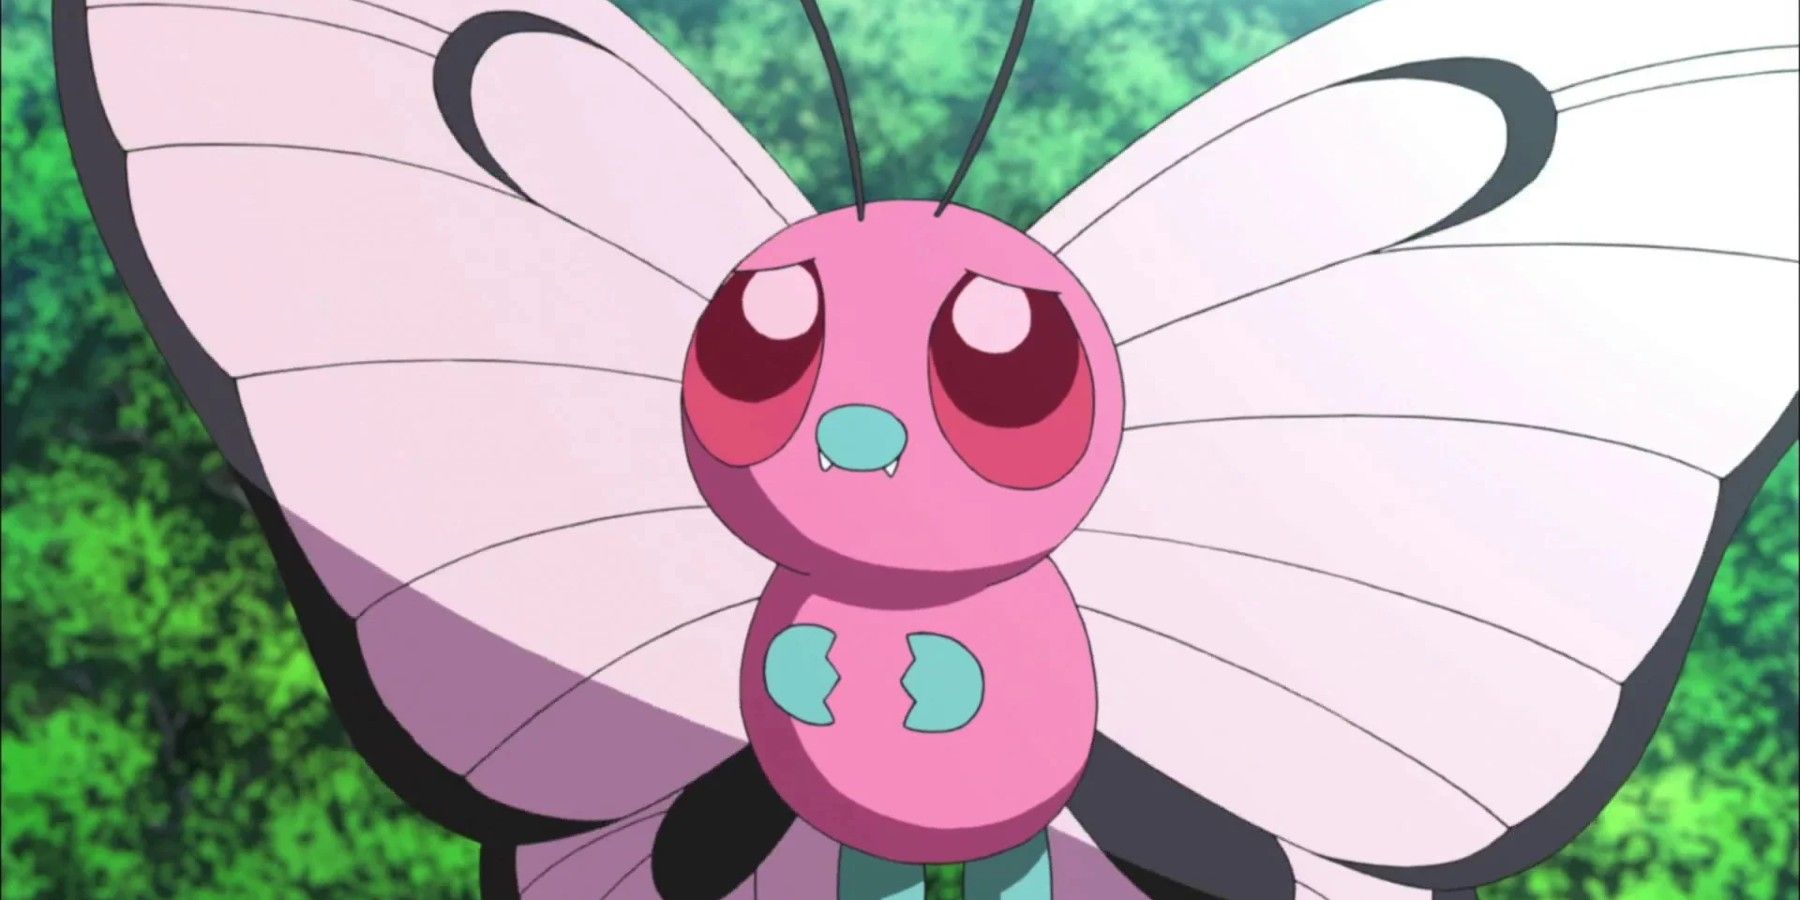 Pokemon Fans Are Still Debating the Venomoth and Butterfree ‘Swapped’ Theory